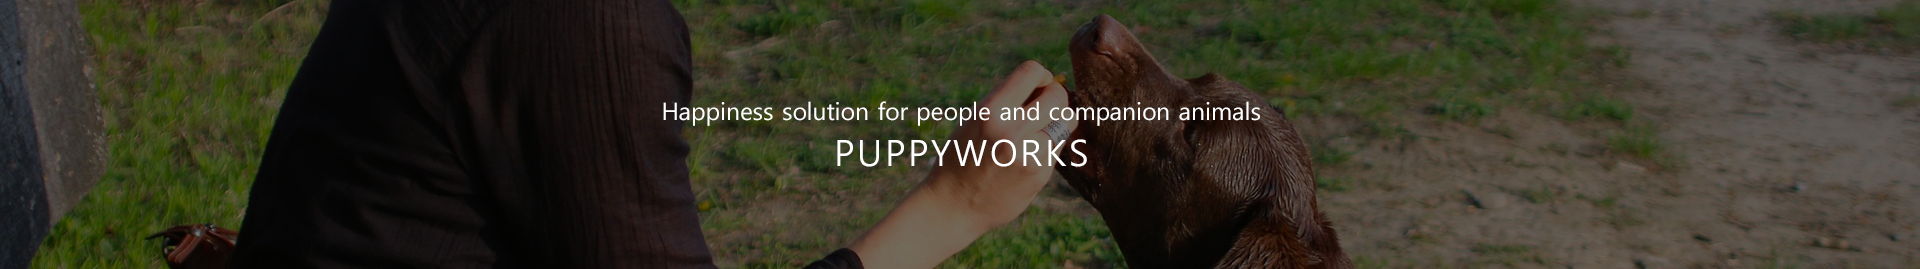 Happiness solution for people and companion animals, PUPPYWORKS